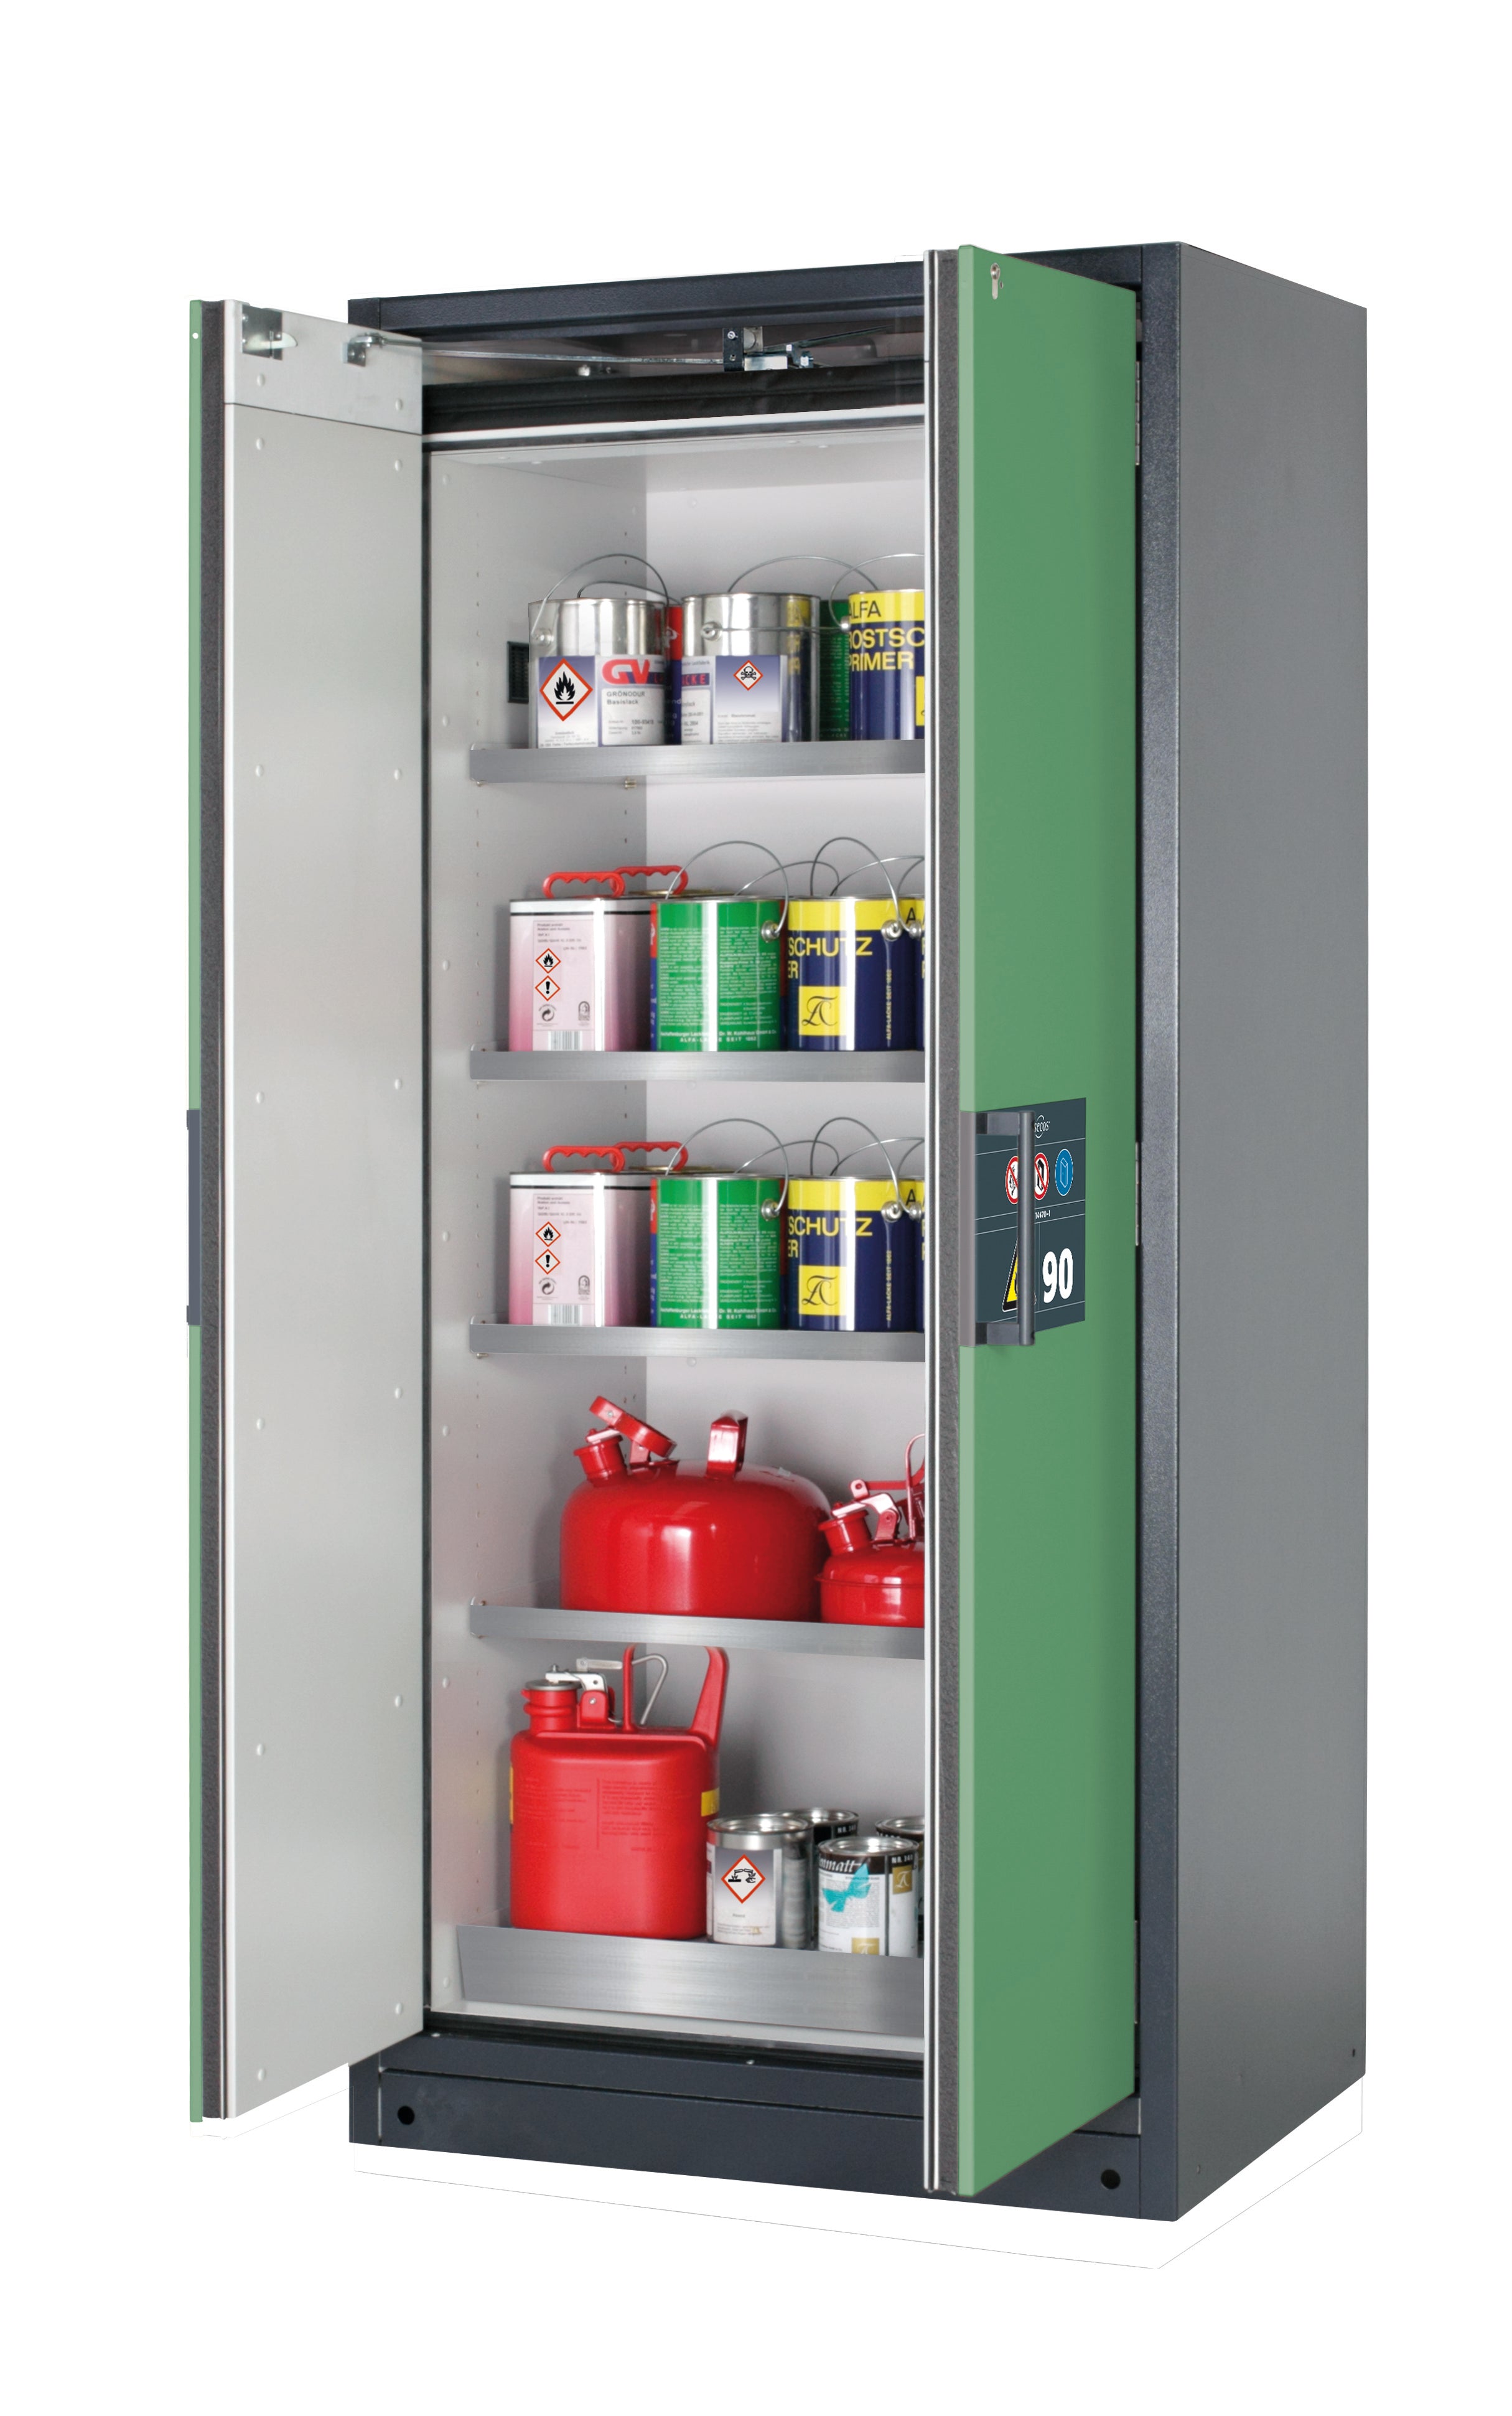 Type 90 safety storage cabinet Q-PEGASUS-90 model Q90.195.090.WDAC in reseda green RAL 6011 with 4x shelf standard (stainless steel 1.4301),